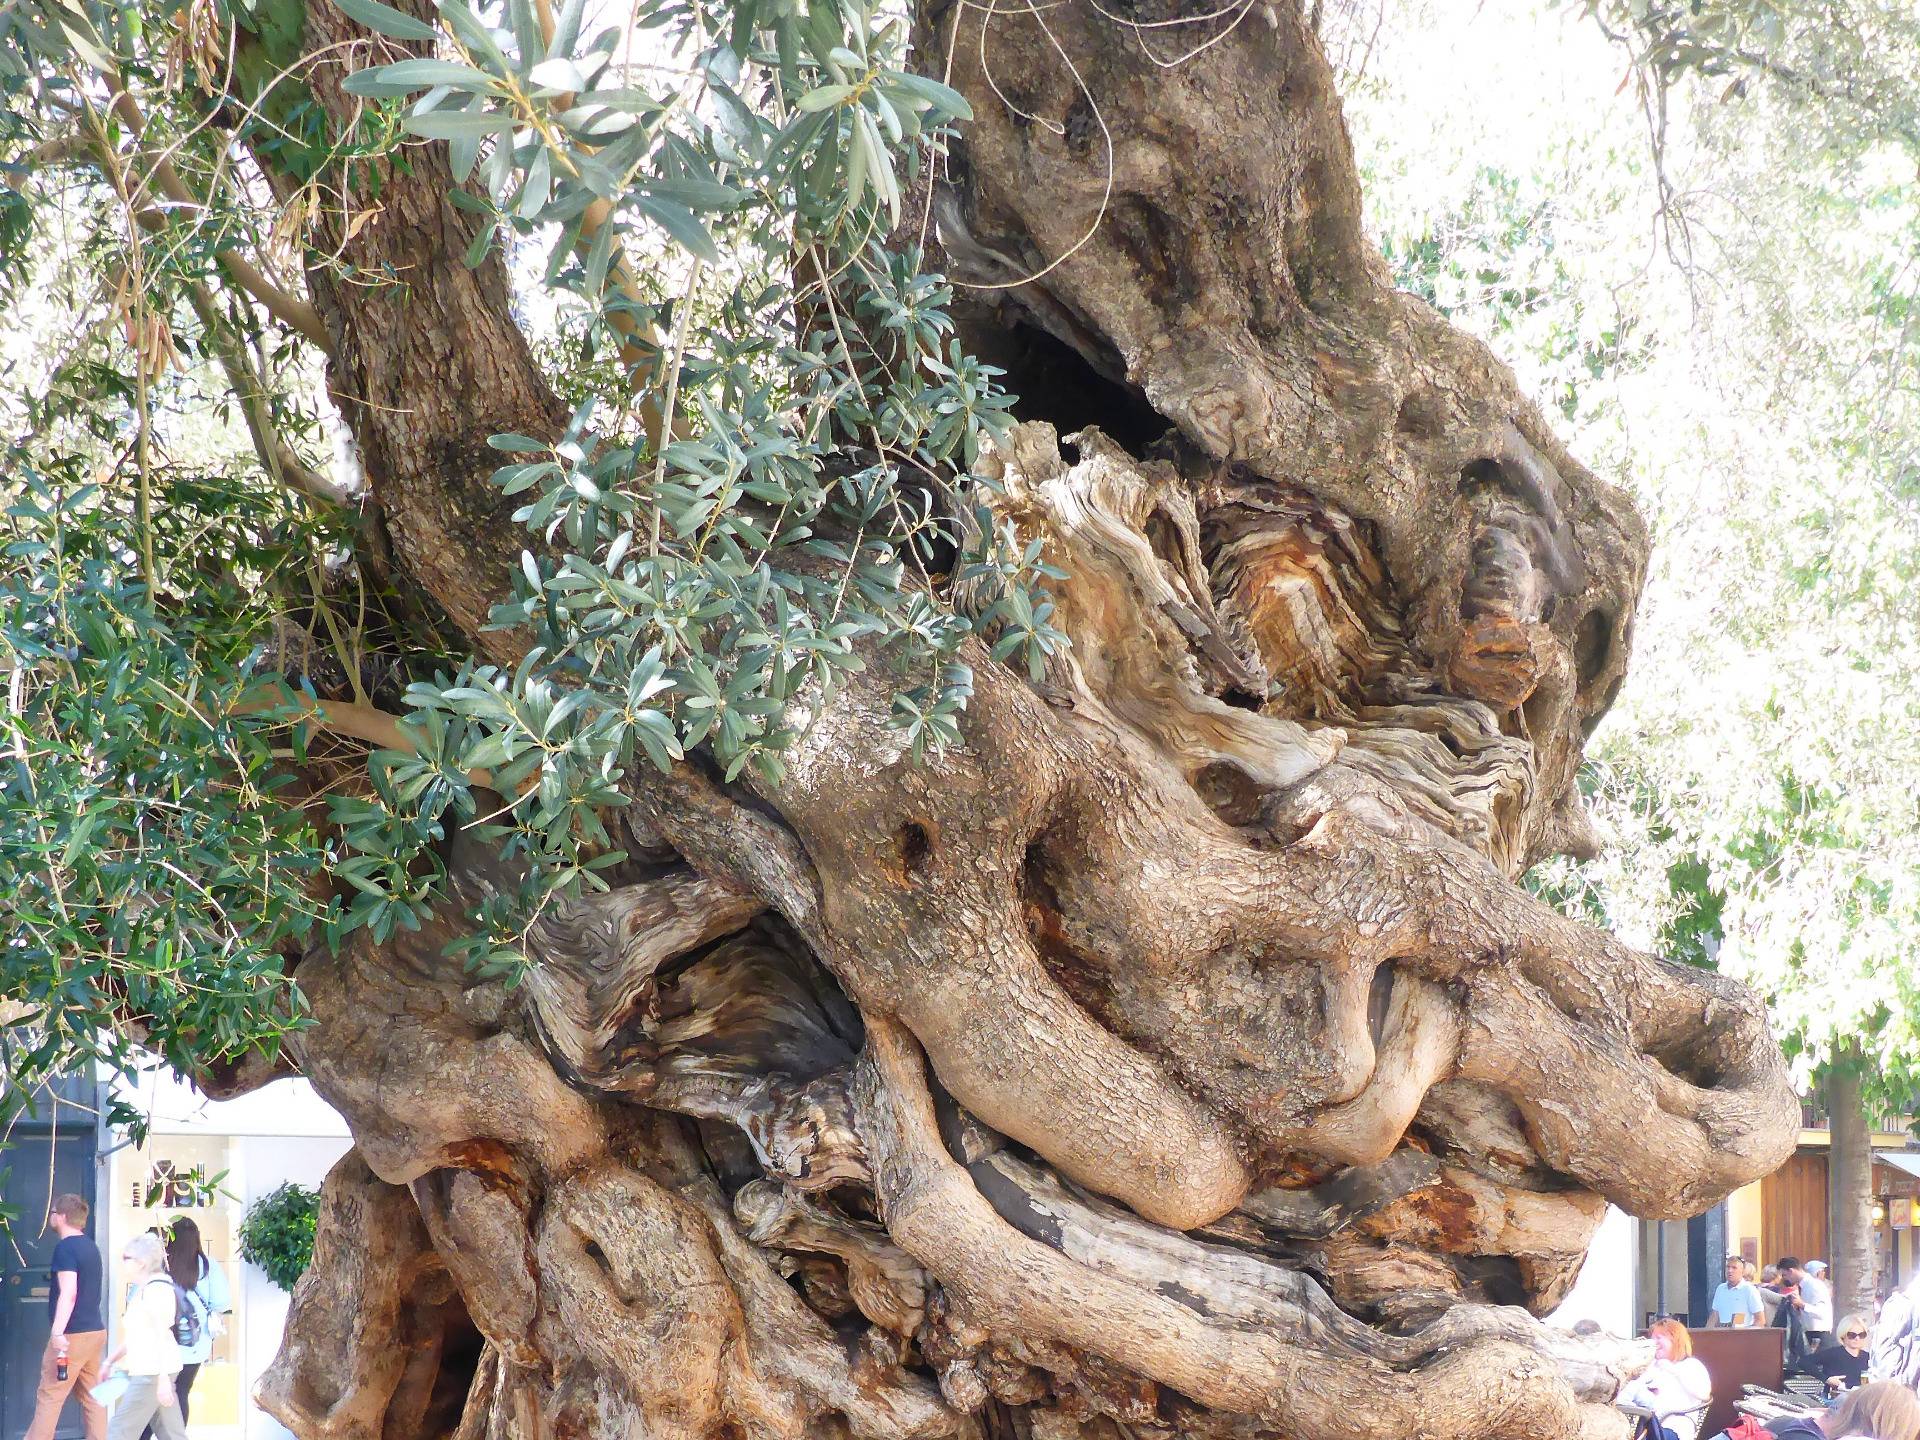 A 600 year old olive tree as a symbol of peace